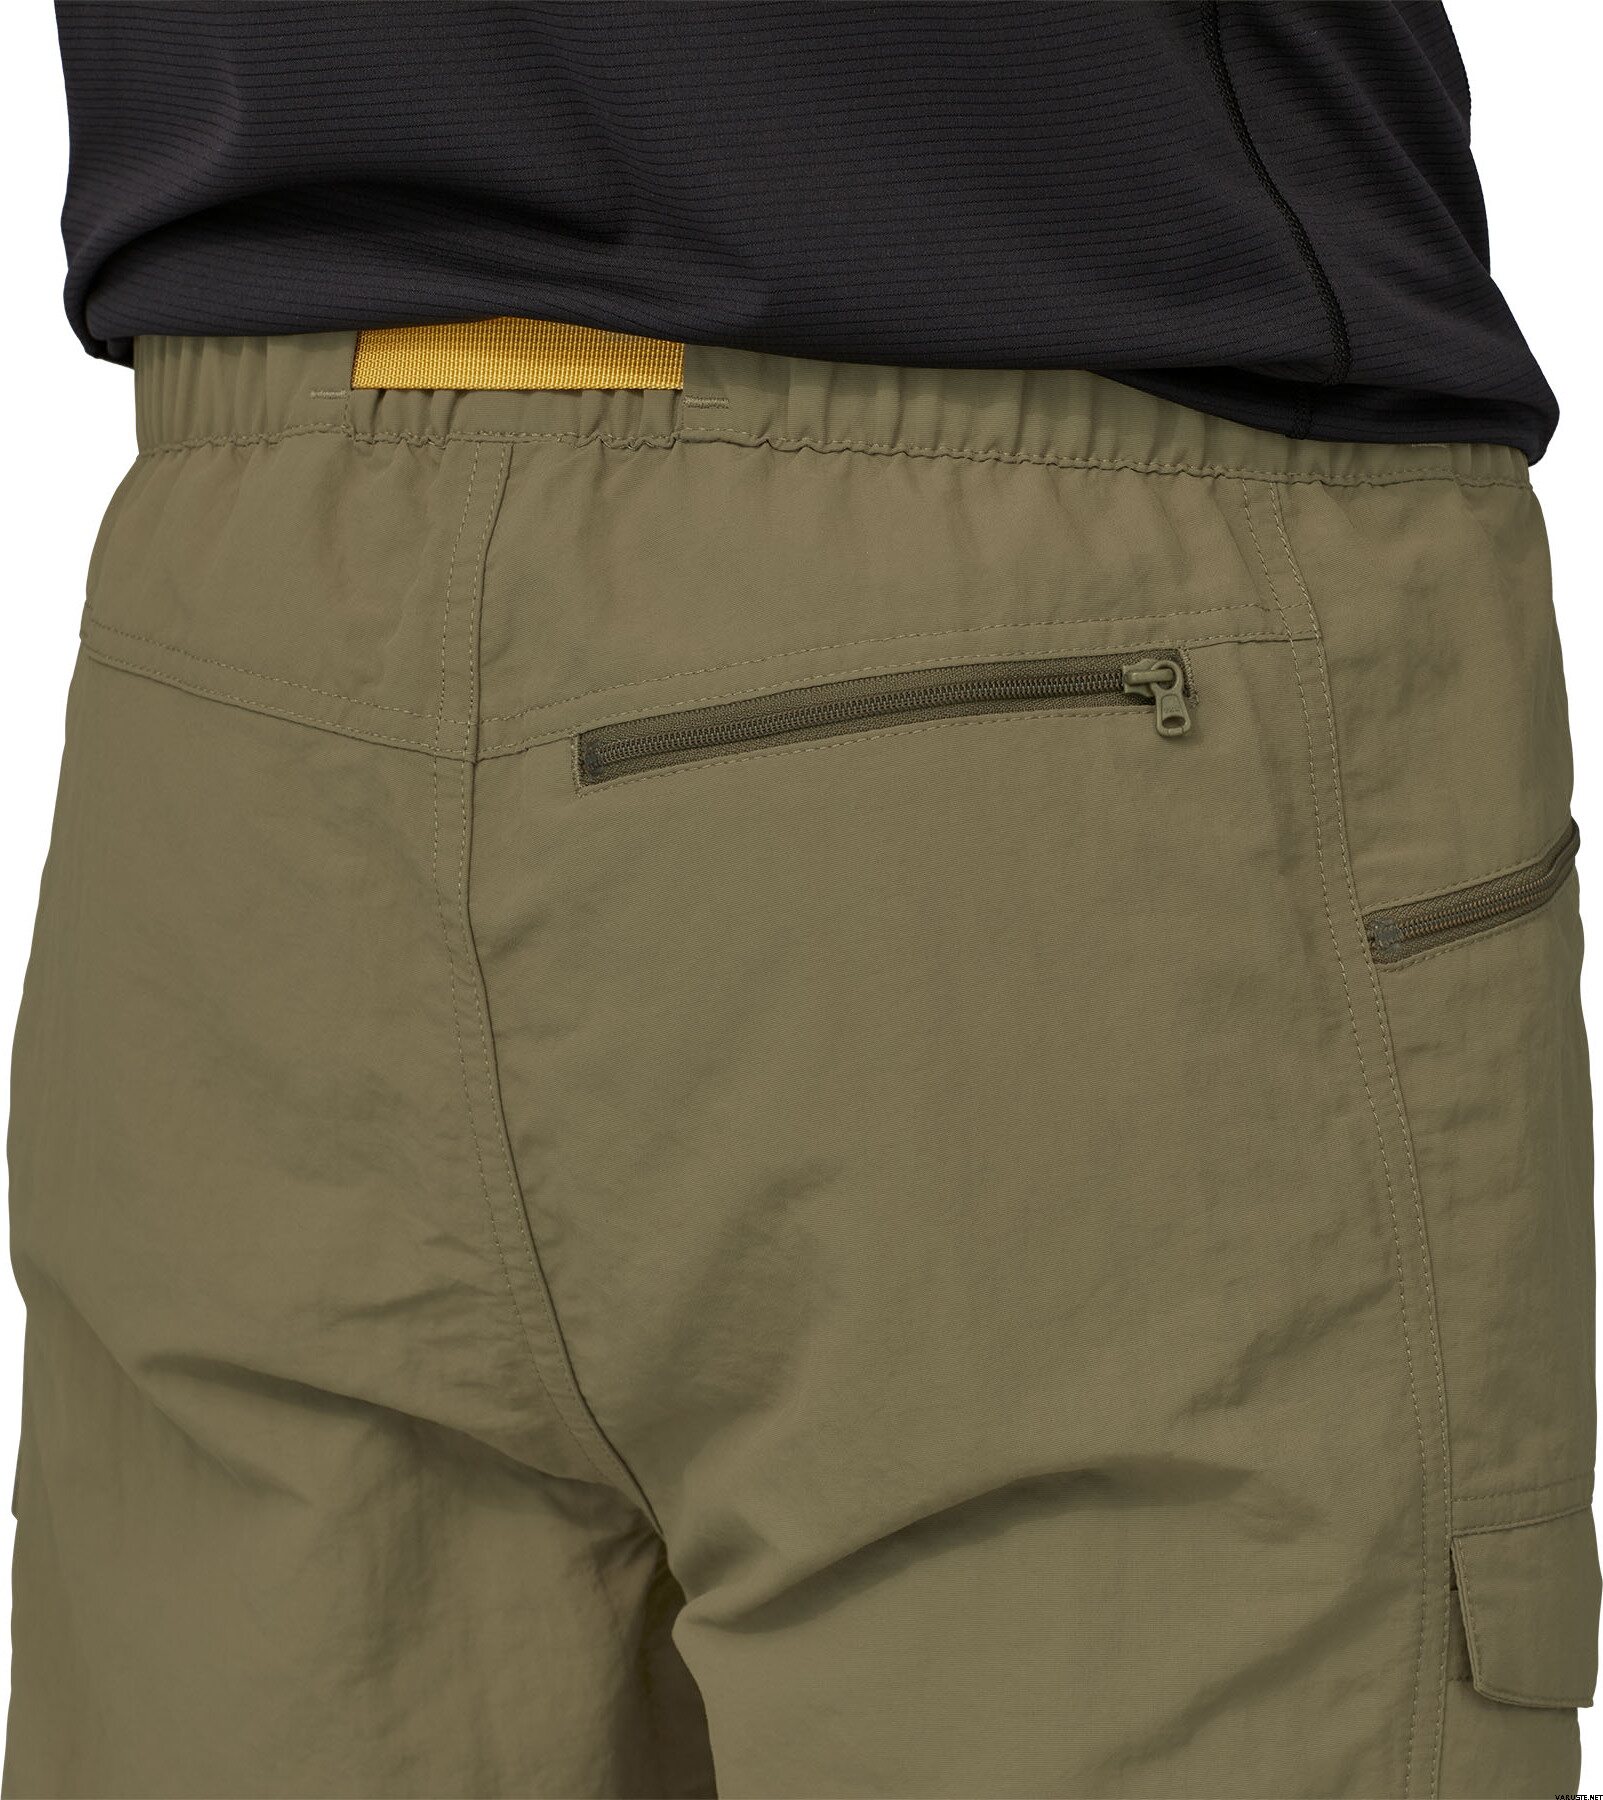 Patagonia Outdoor Everyday Shorts - 7